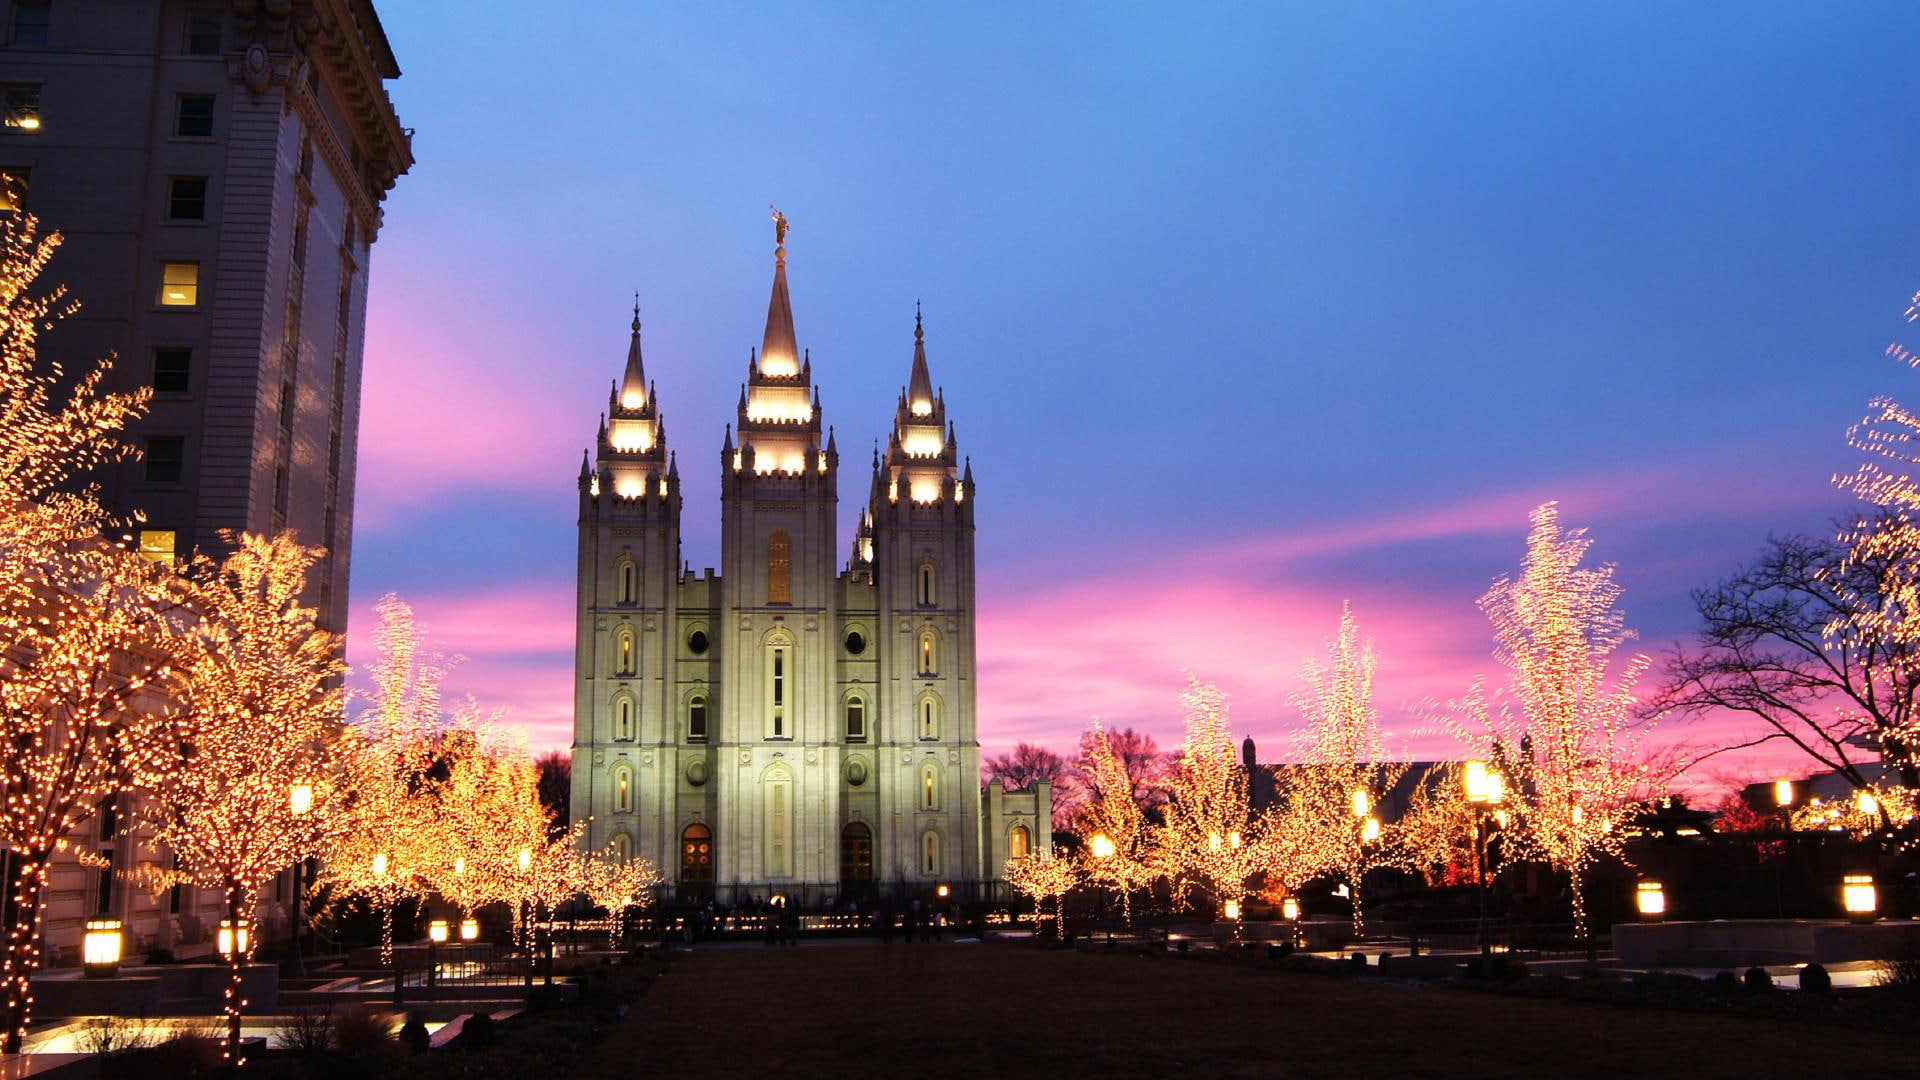 Mormon Temple At Christmas, lights, holidays, temples, nature and landscapes